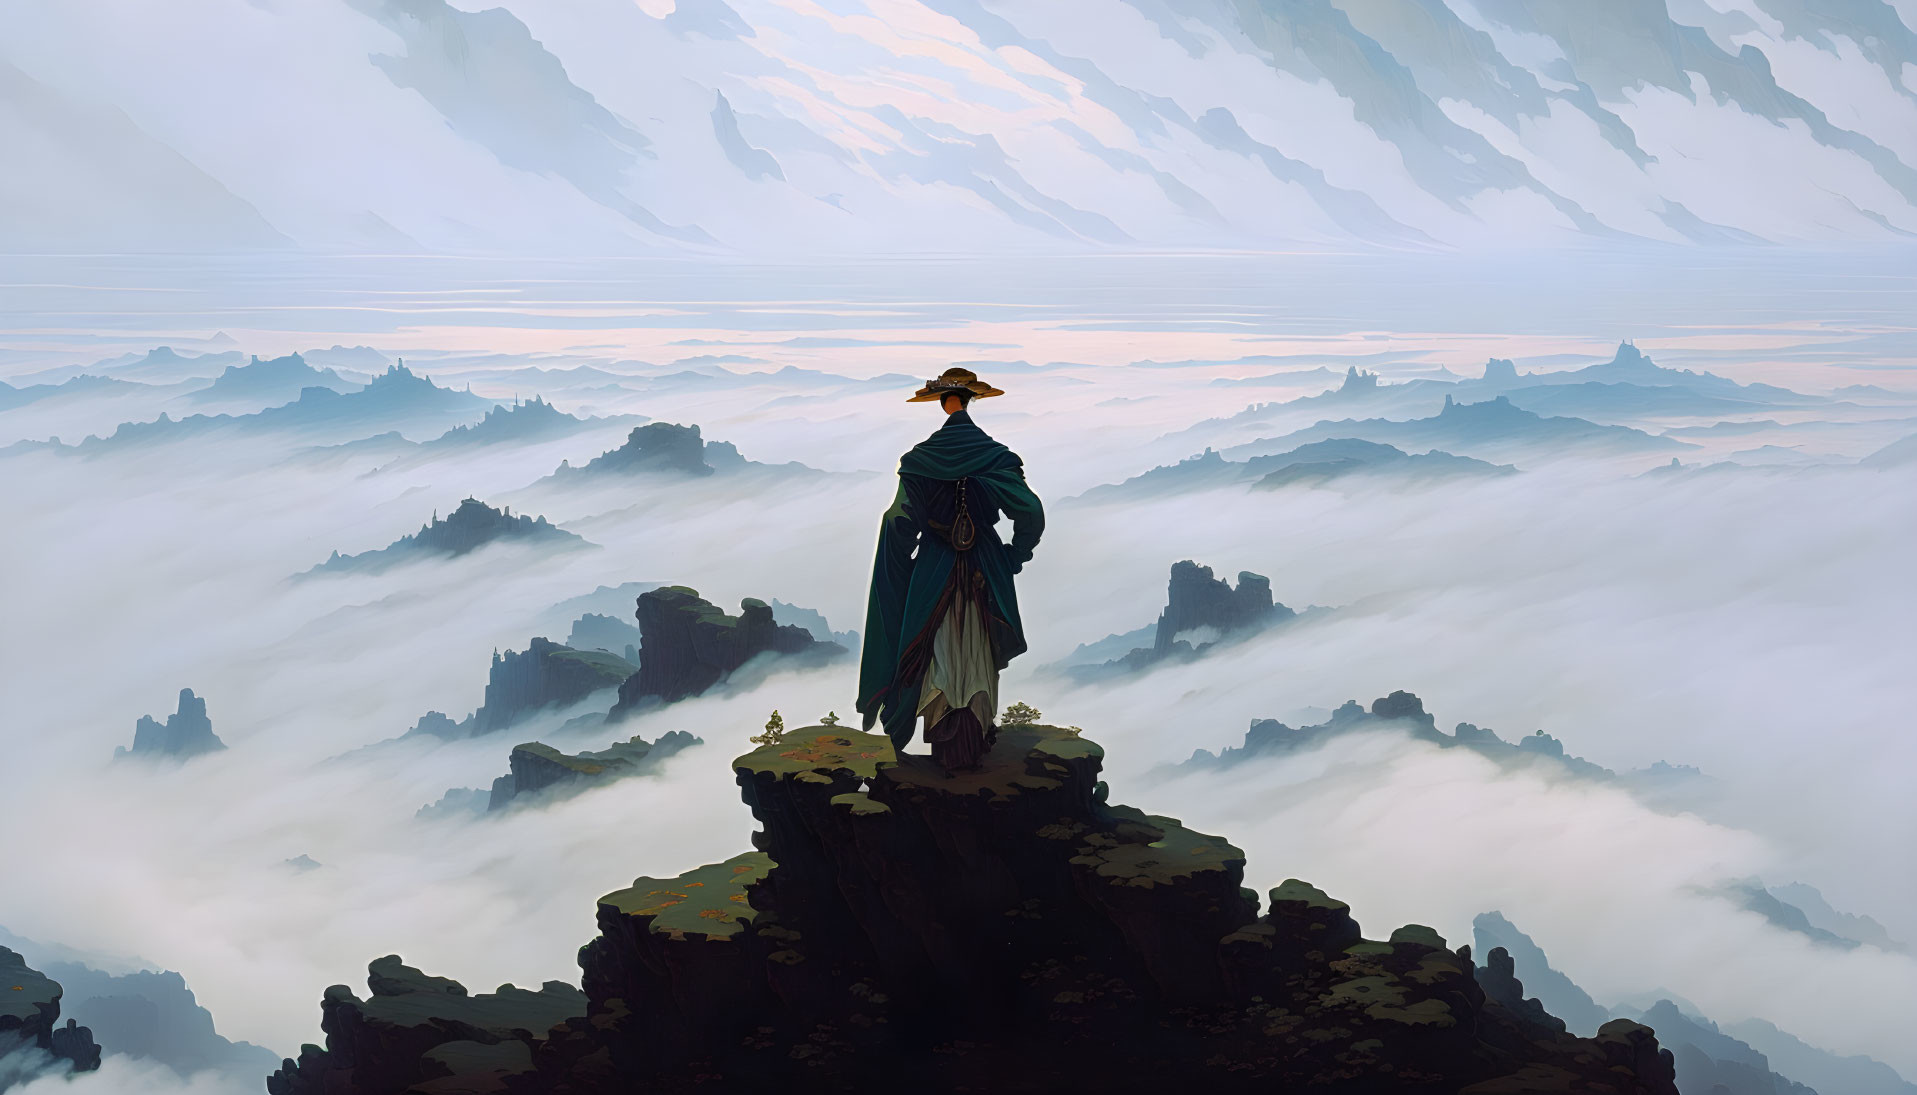 Figure in hat and cloak on mountain peak gazes at rugged landscape under dramatic sky